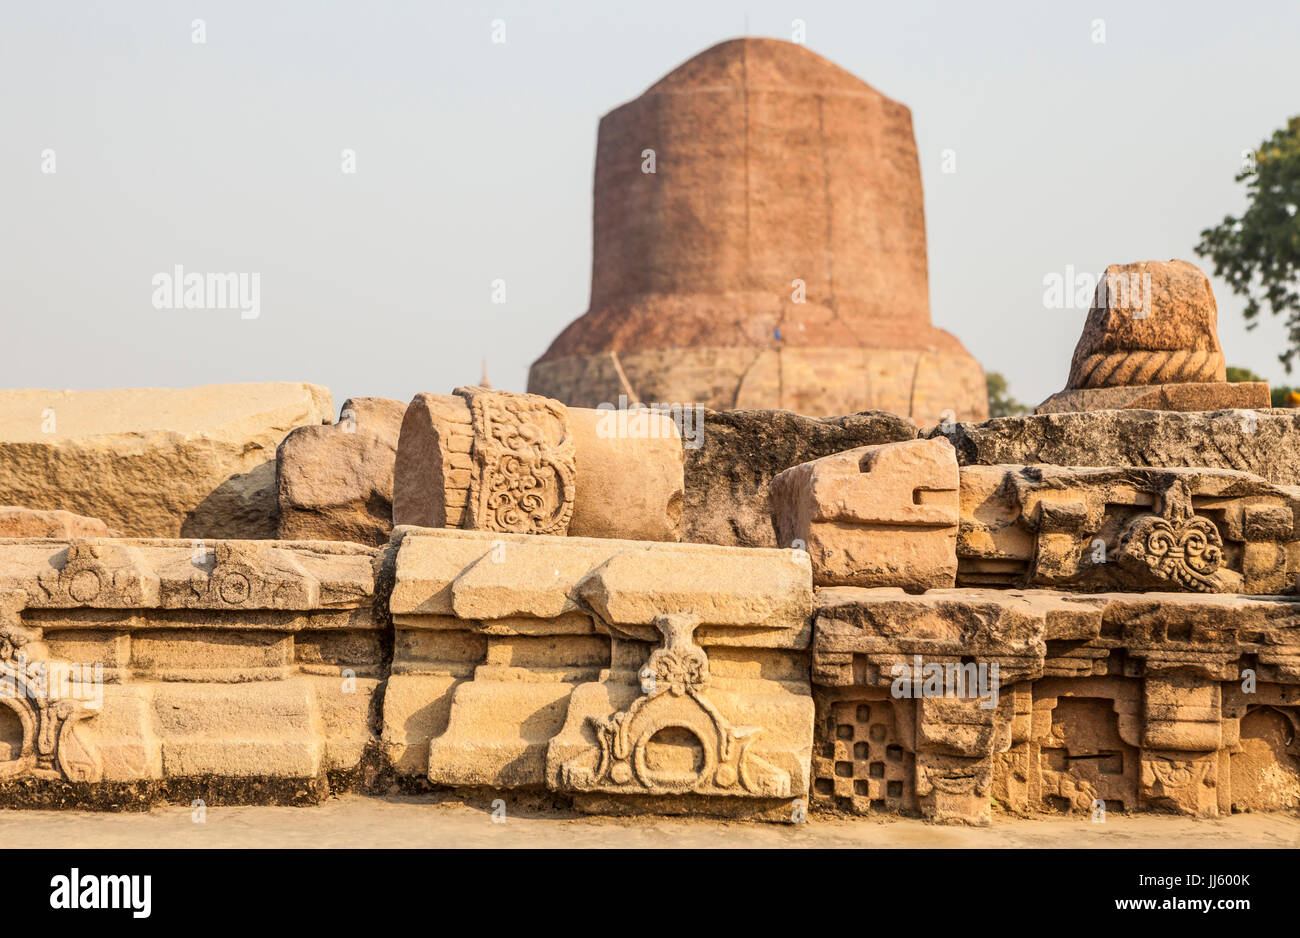 Dhamekh Stupa in Sarnath, India, the birthplace of buddhism. Buddha is said to have preached his first sermon where this stupa stands now. Stock Photo